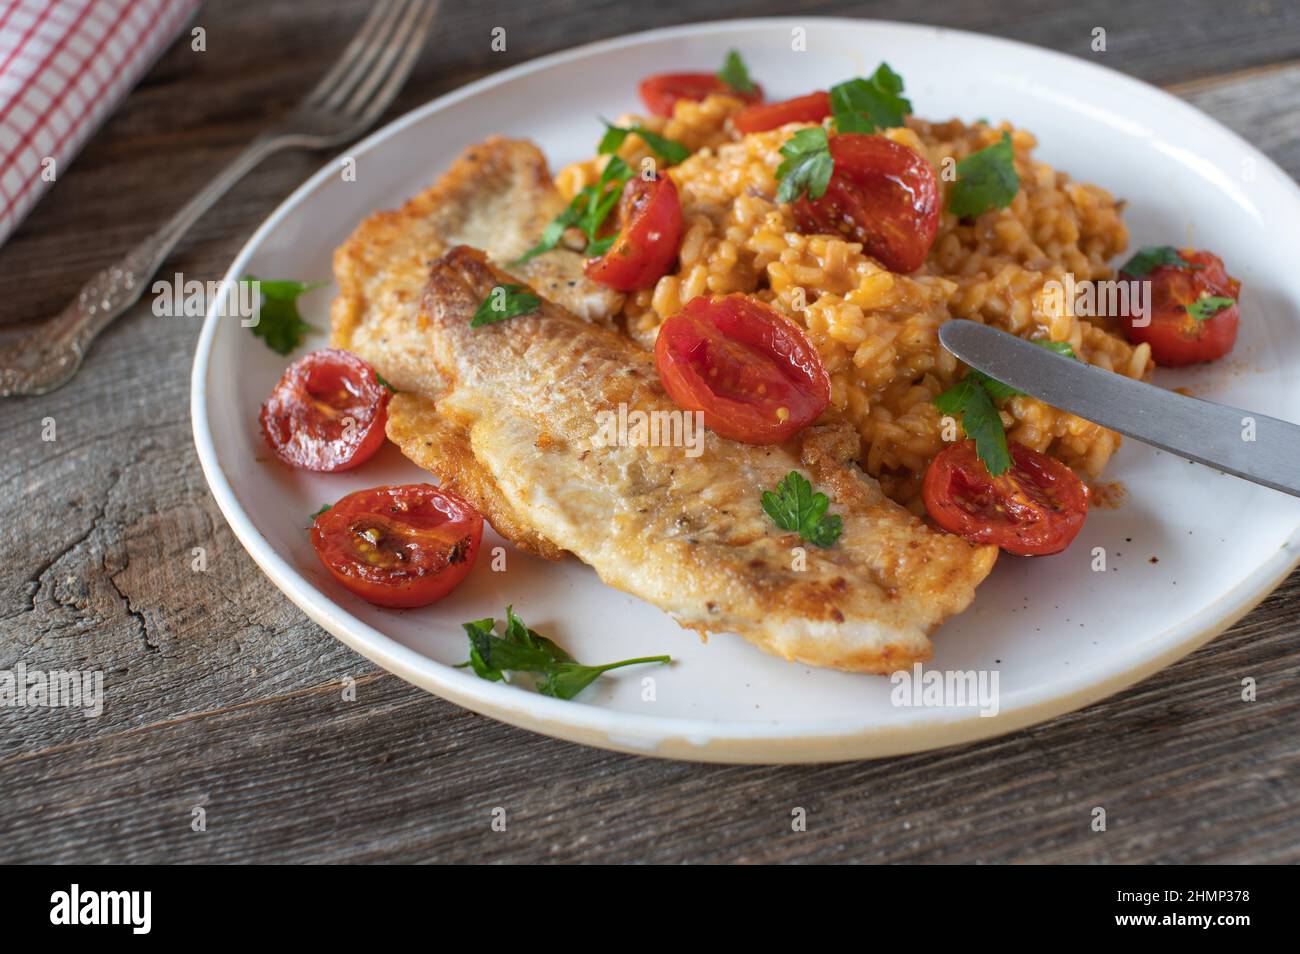 Roasted fish with tomato risotto on a plate on wooden table background Stock Photo